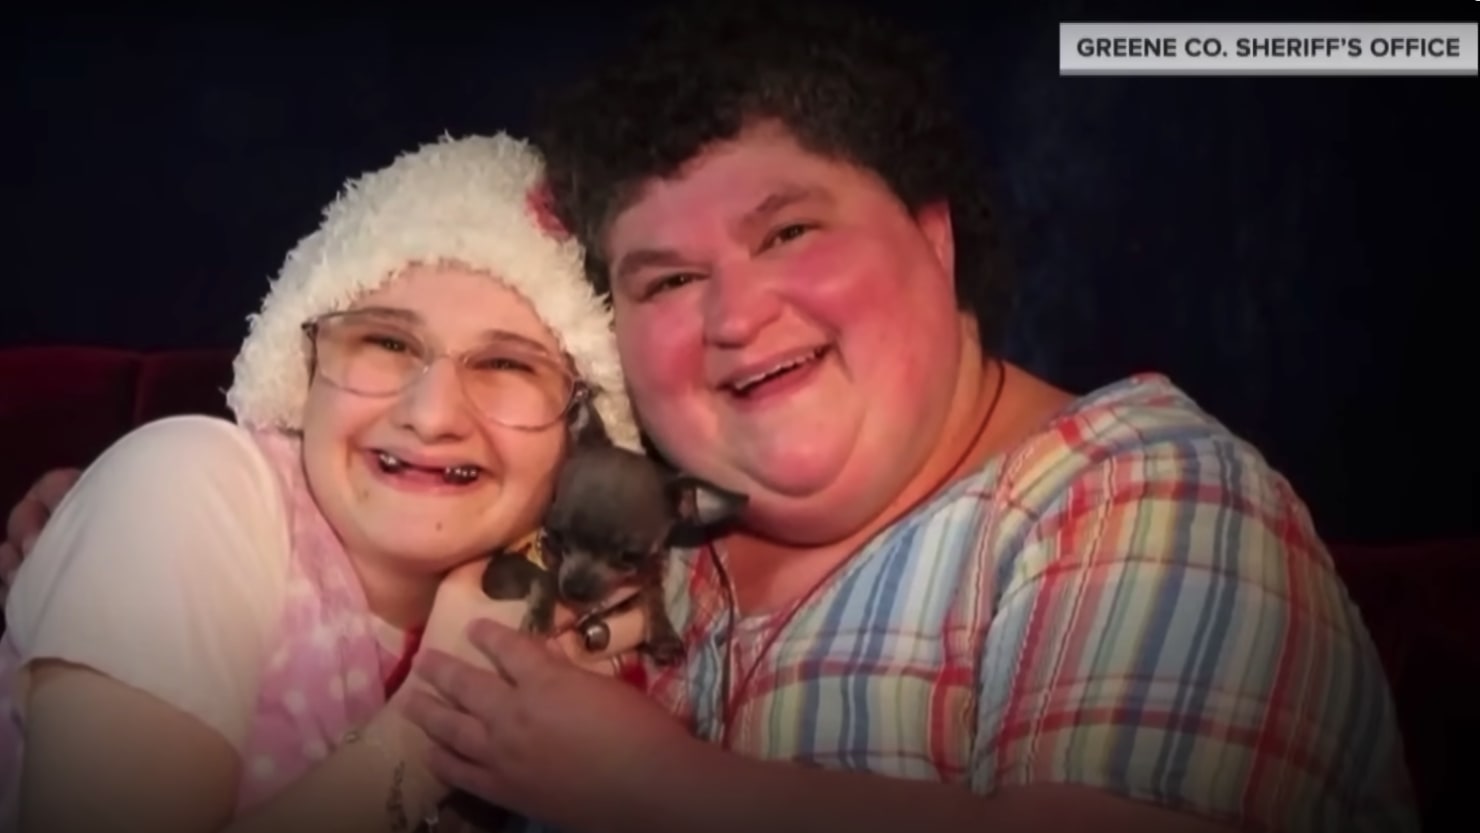 Gypsy Rose Blanchard Who Murdered Allegedly Abusive Mother Dee Dee Released From Prison 